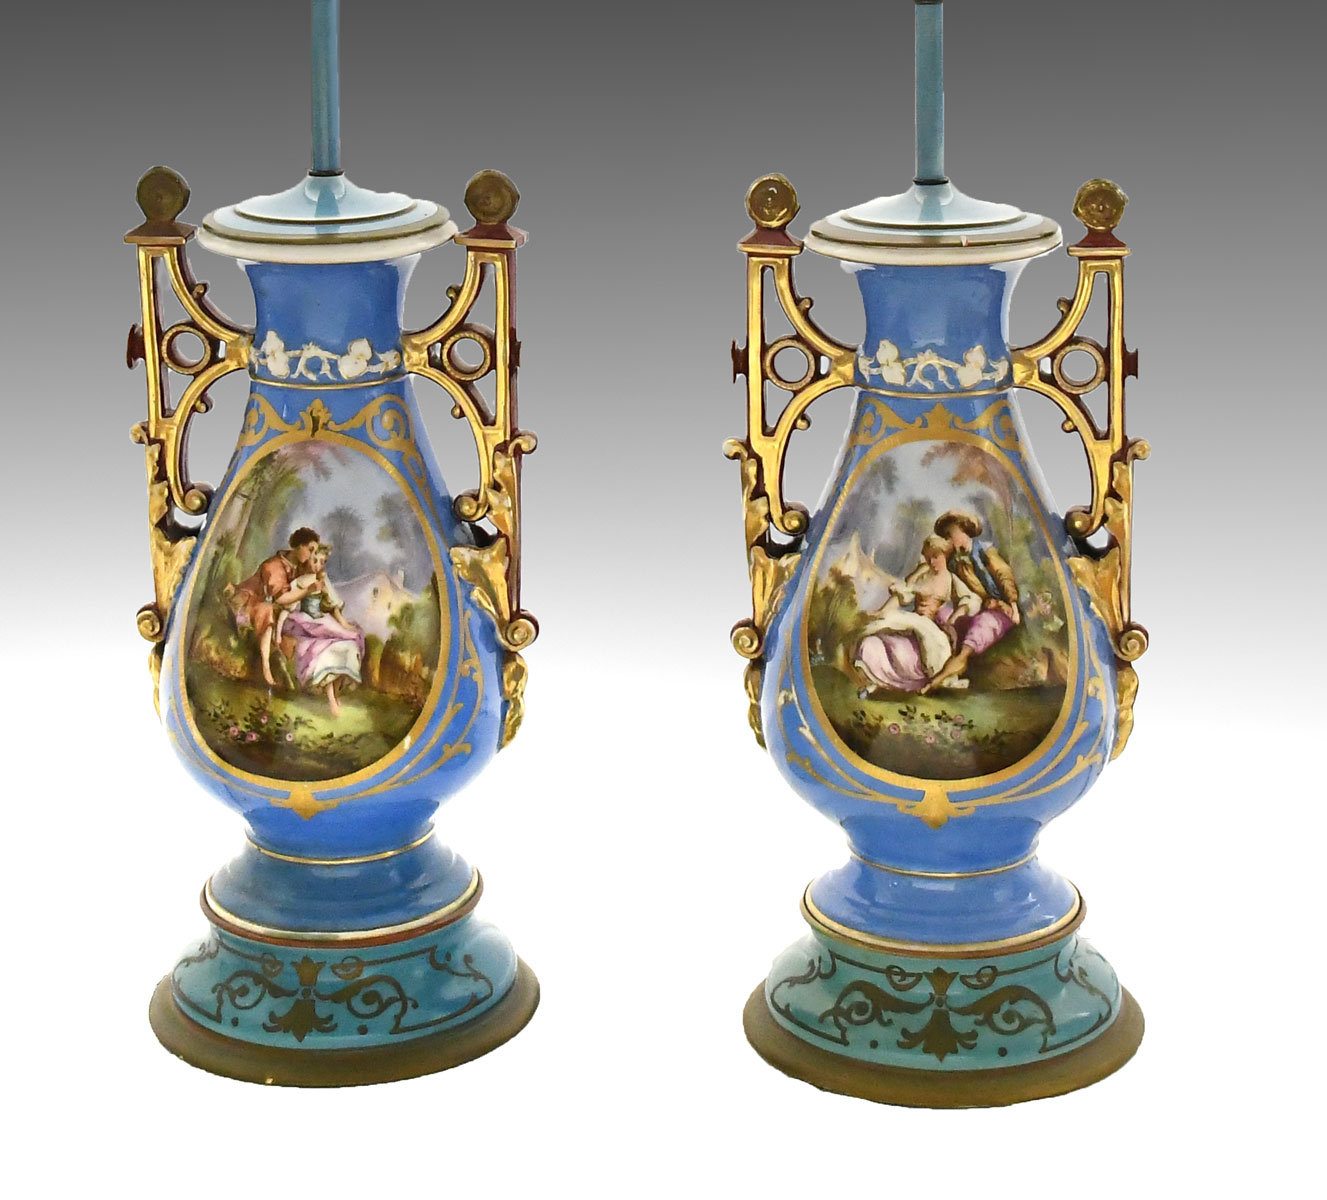 OLD PARIS STYLE LAMPS: Blue ground